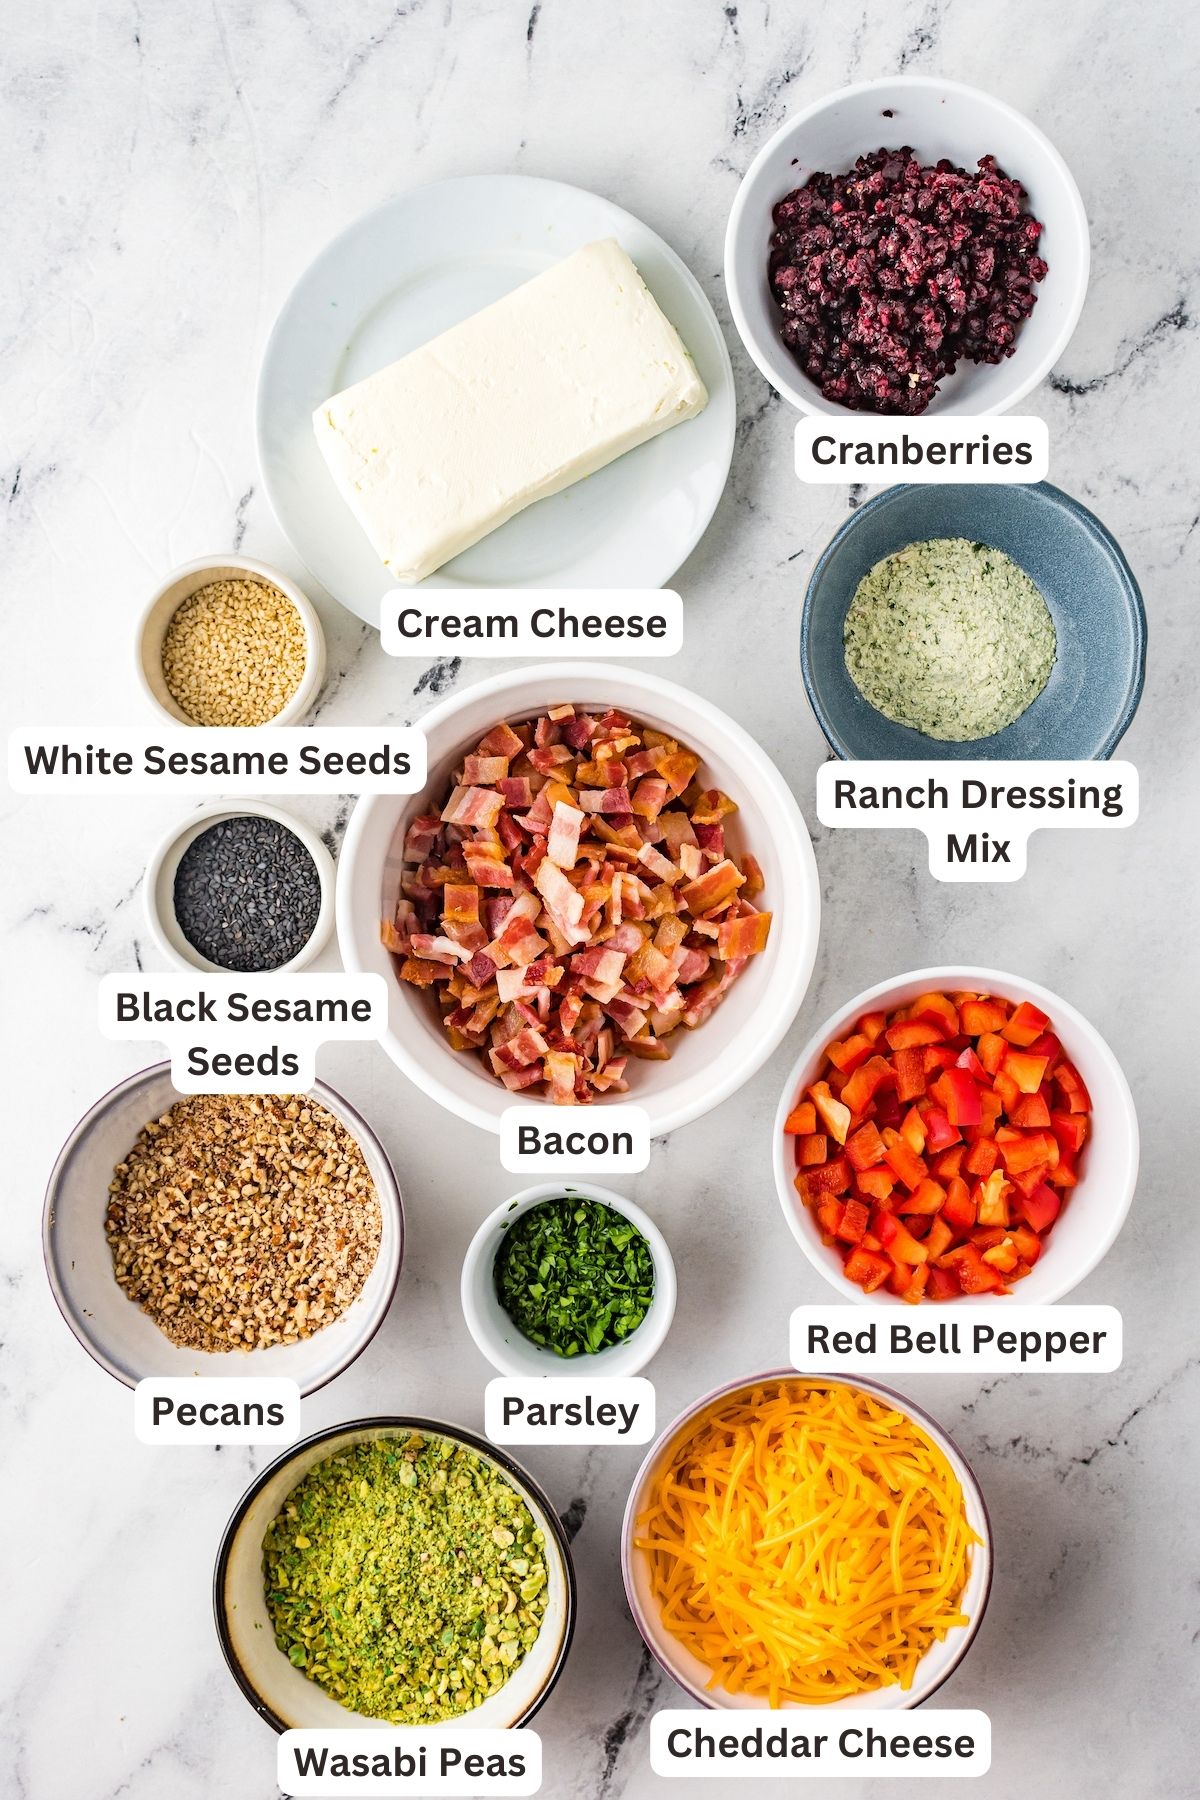 Ingredients to make Holiday Cheese Ball Wreath.